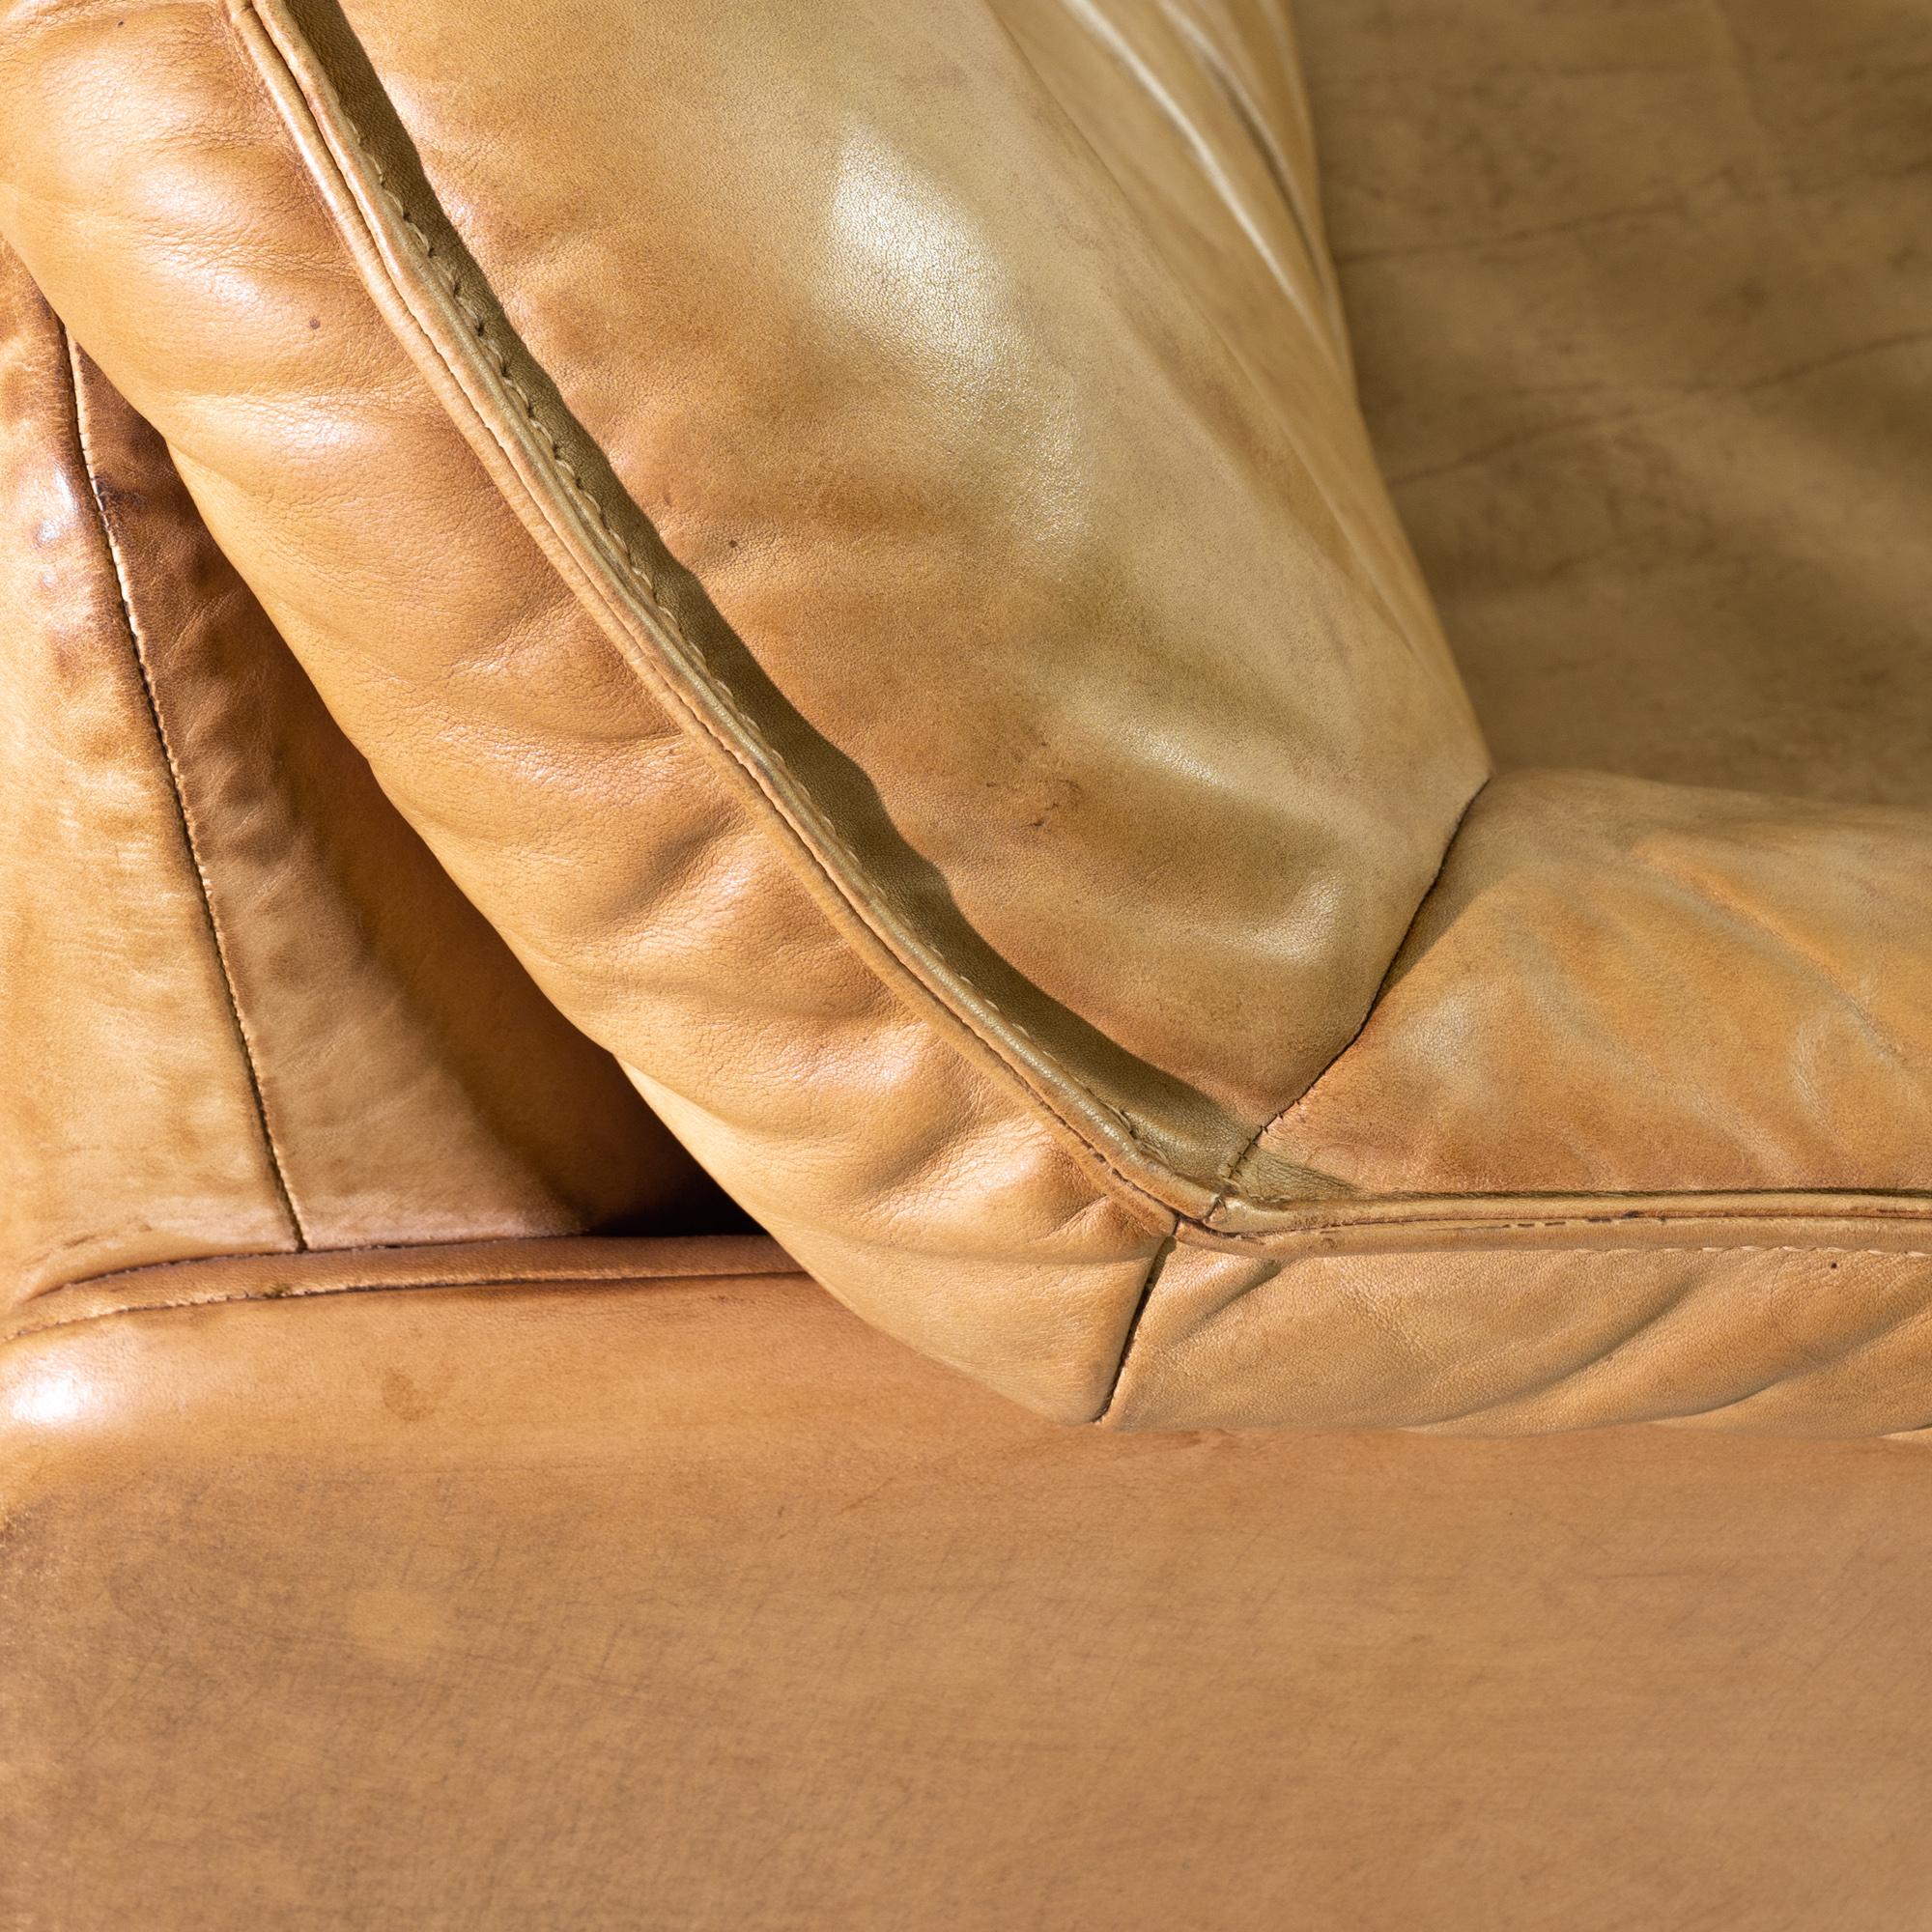 A model DS16 leather loveseat designed and manufactured by De Sede. Creating leather furniture since the 1960s, this vintage model has a unique appeal; De Sede hand-crafts unique sofas with famous attention to detail and precision. This sofa retains